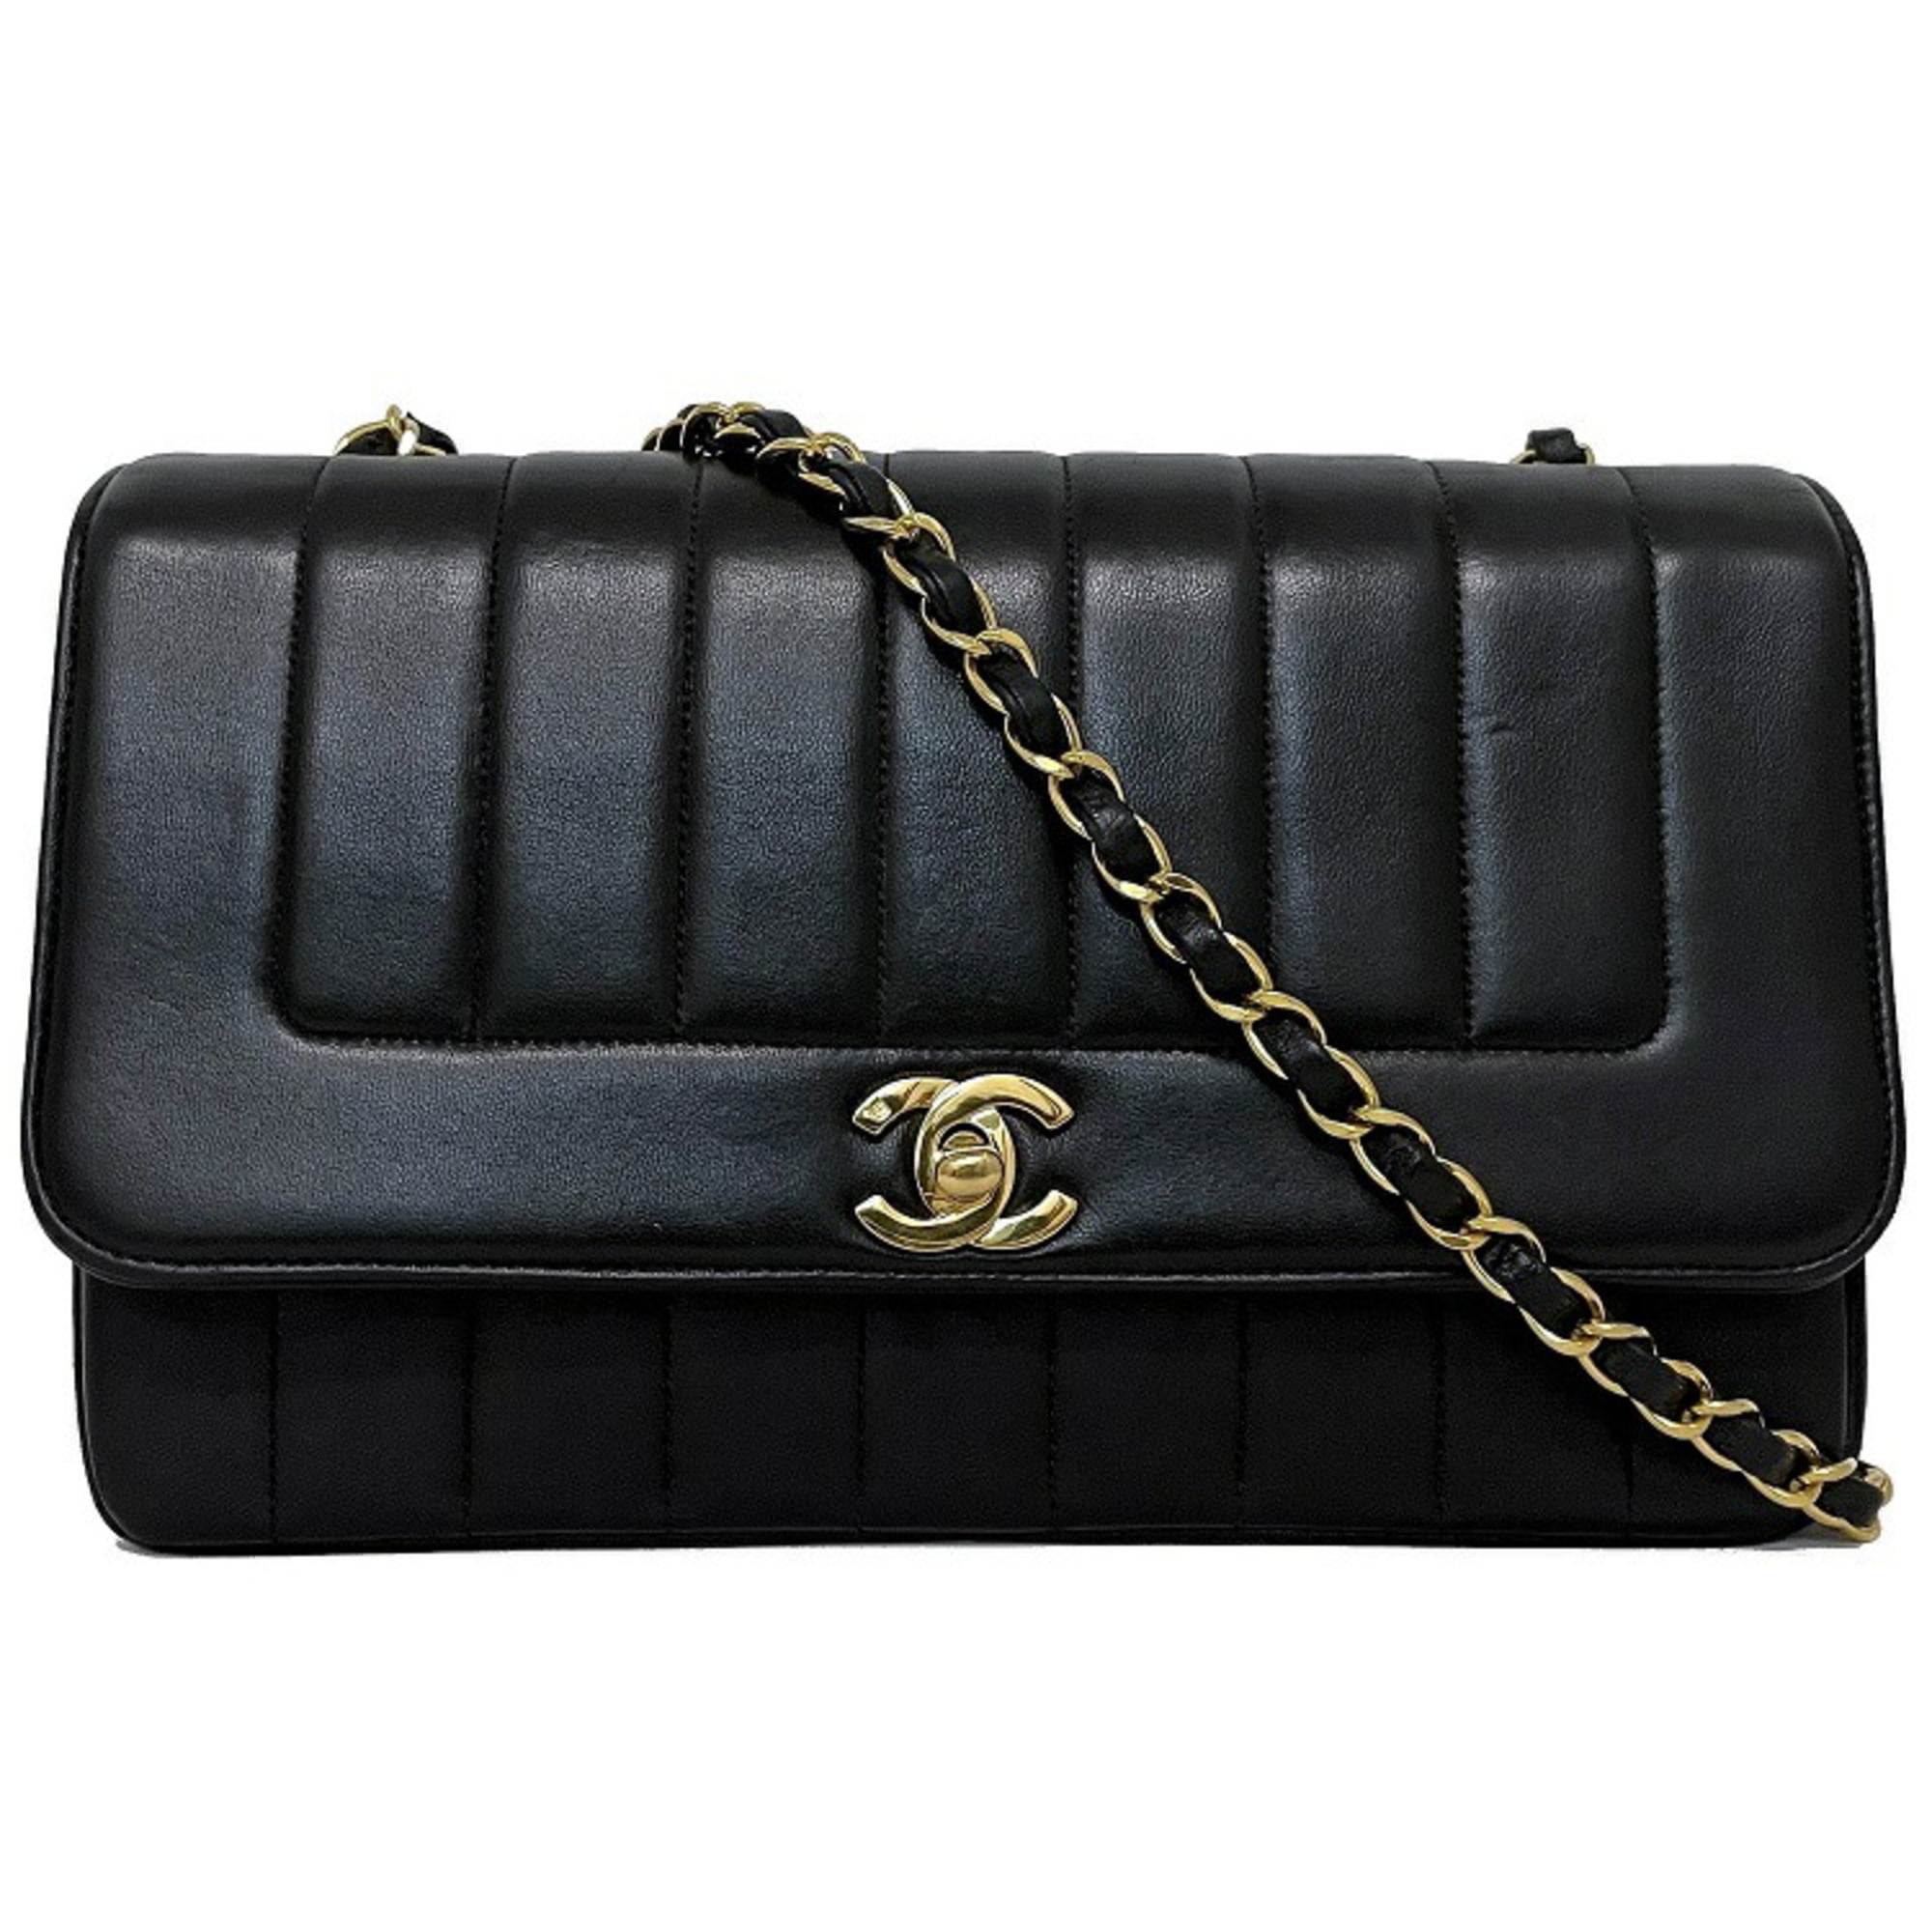 Authenticated Used Chanel Chain Shoulder Bag Black Mademoiselle Single Flap  Lambskin No Seal CHANEL Coco Mark Turn Lock Quilted Stripe Ladies